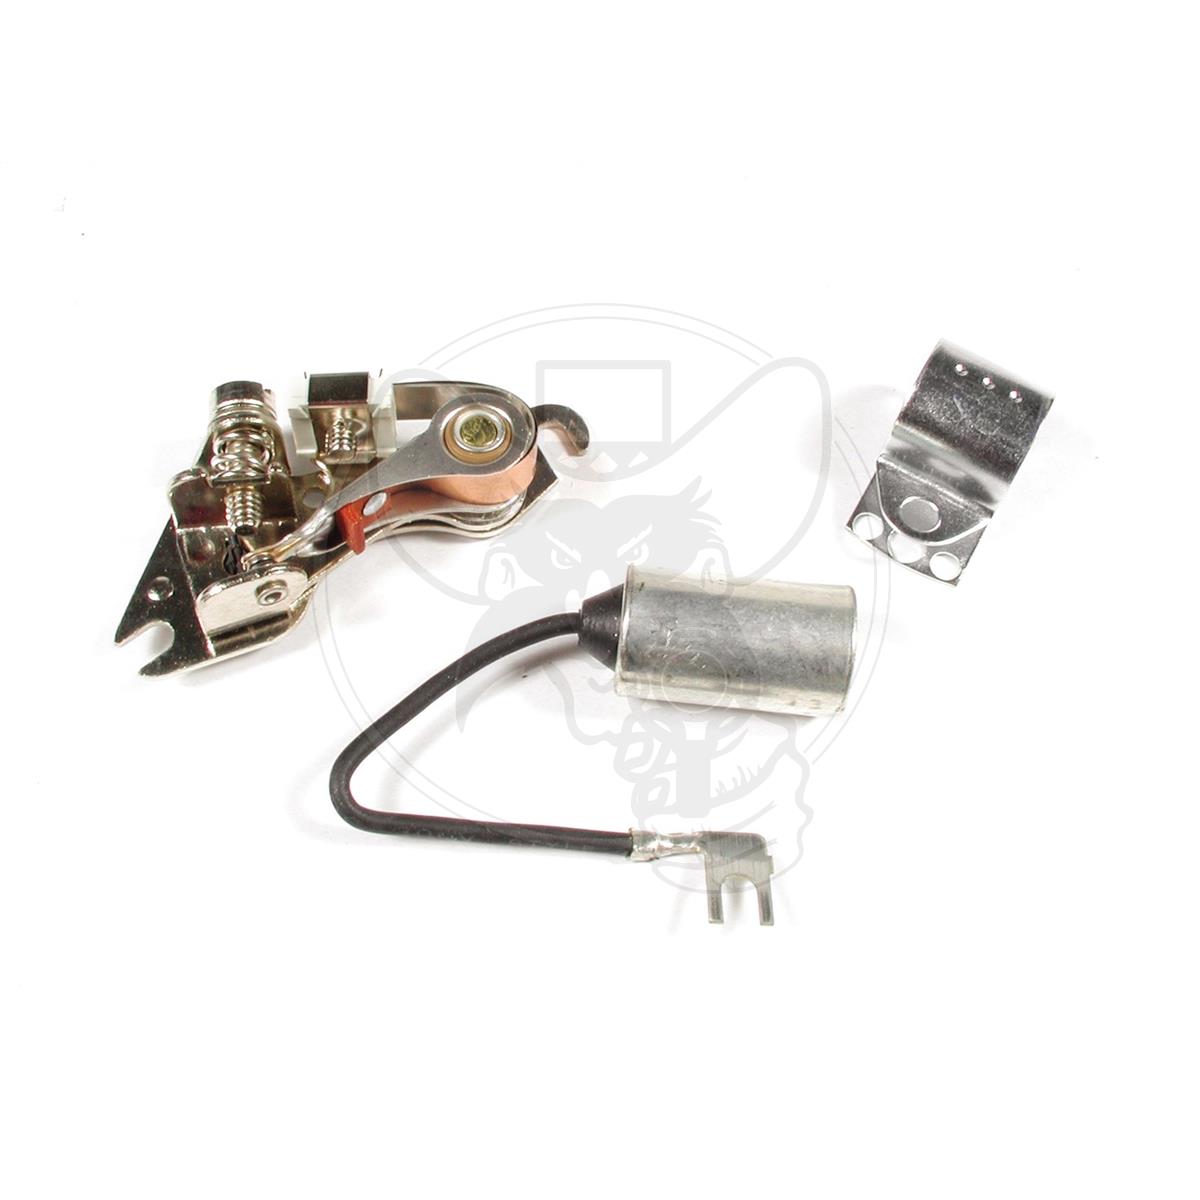 ACCEL IGNITION TUNE UP KIT FITS GM INCLUDES POINTS & CONDENSER